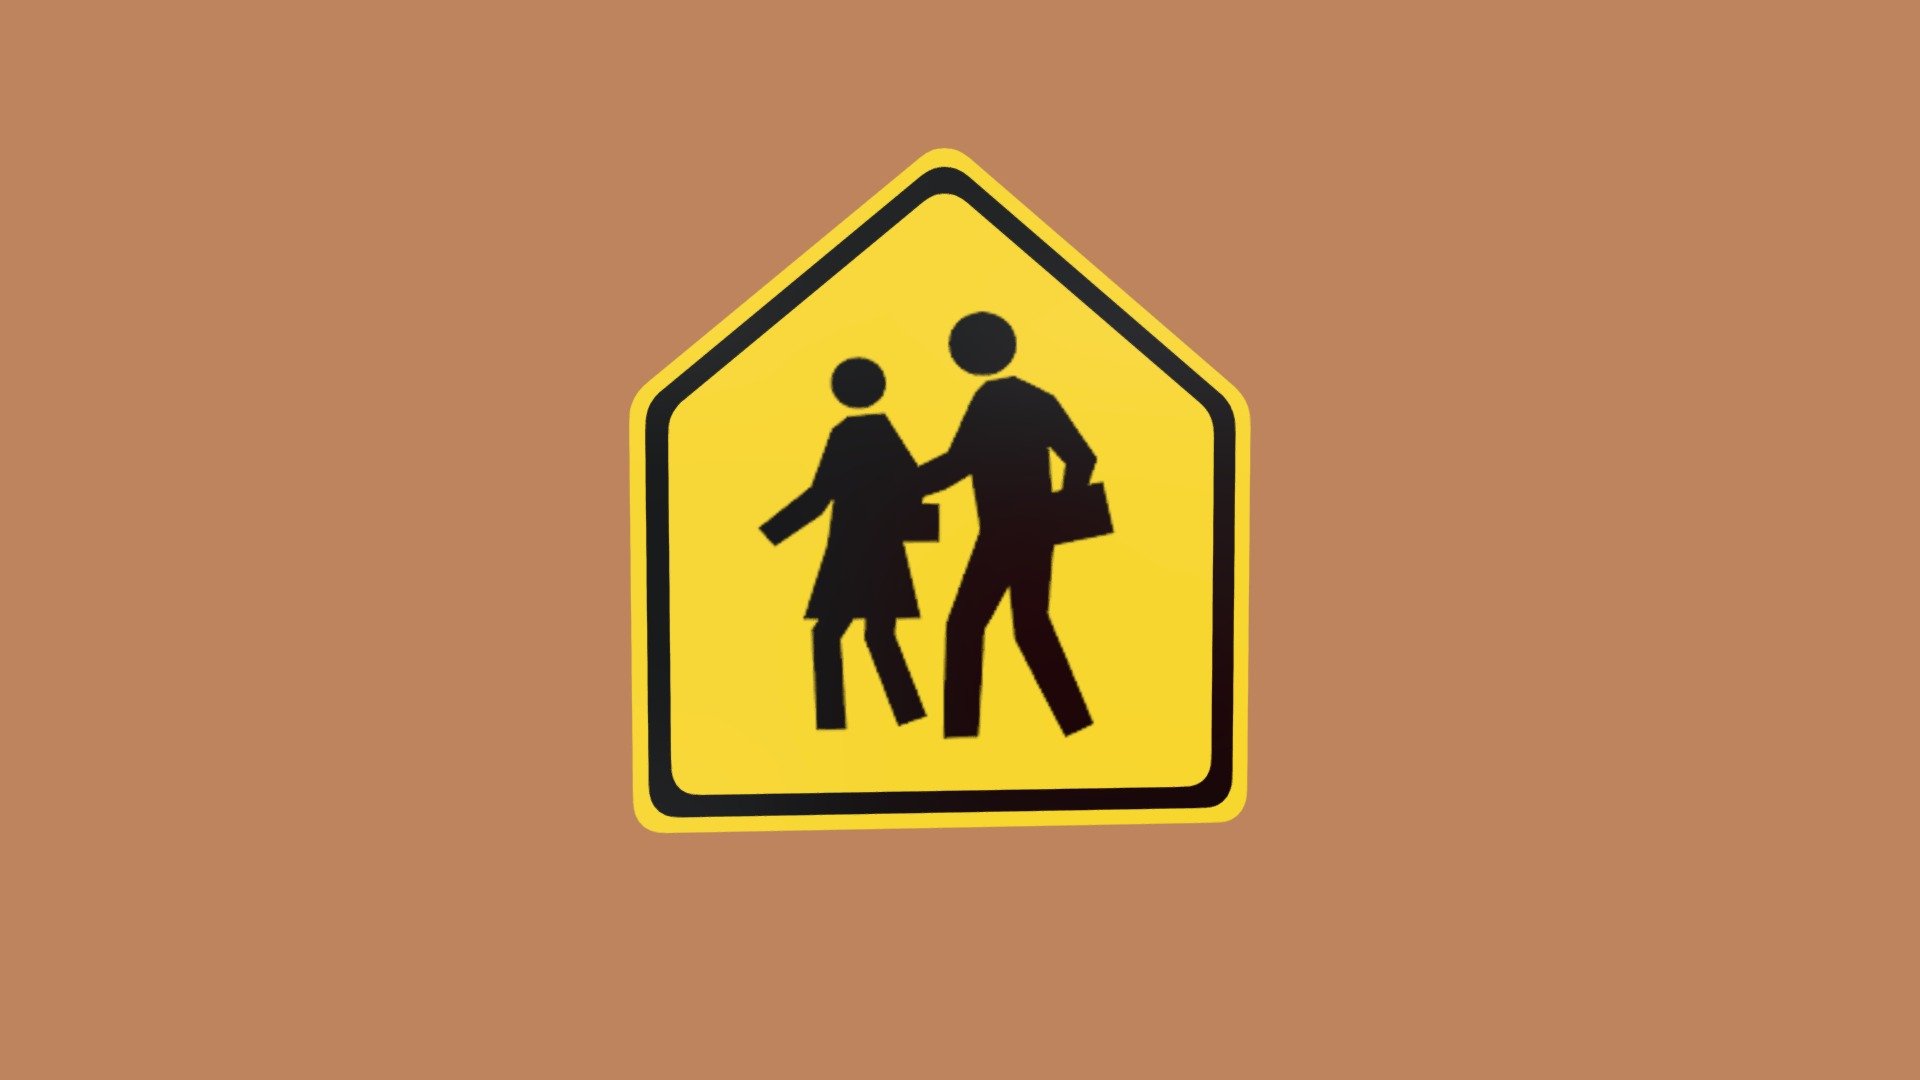 For Day 5 of Nodevember, I made a school crossing street sign! I started the pole that it hangs from too, but I realized it would take too much time to finish that. So, it's just the sign. Maybe I'll add some more detail later on, but for Nodevember, it's a good enough for now 3d model